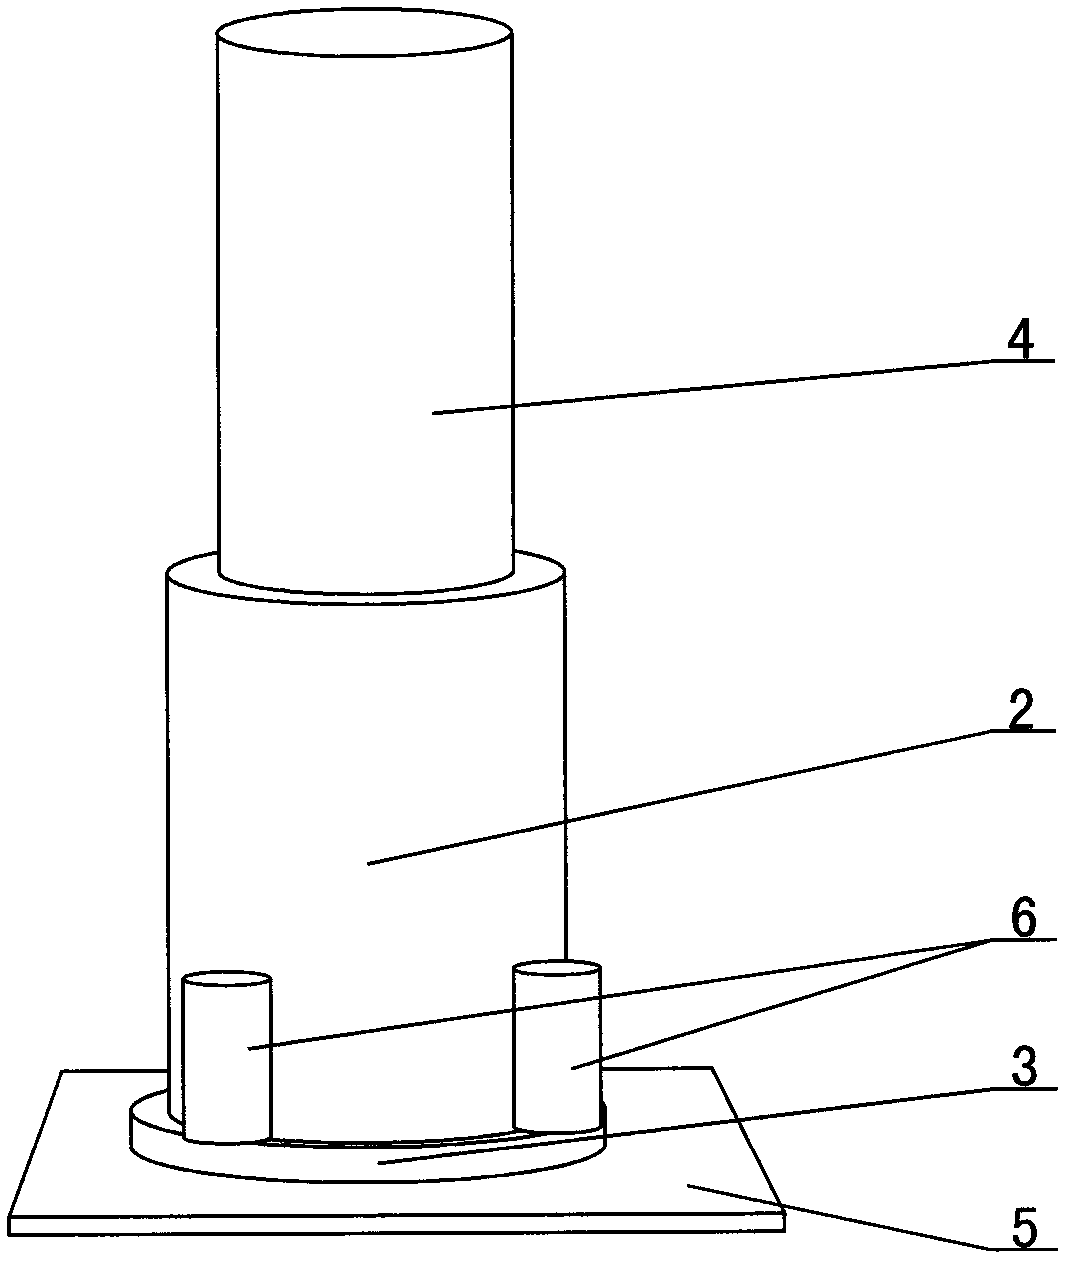 Integral copper crucible and method for producing copper crucible by integral forging and rotary pressing